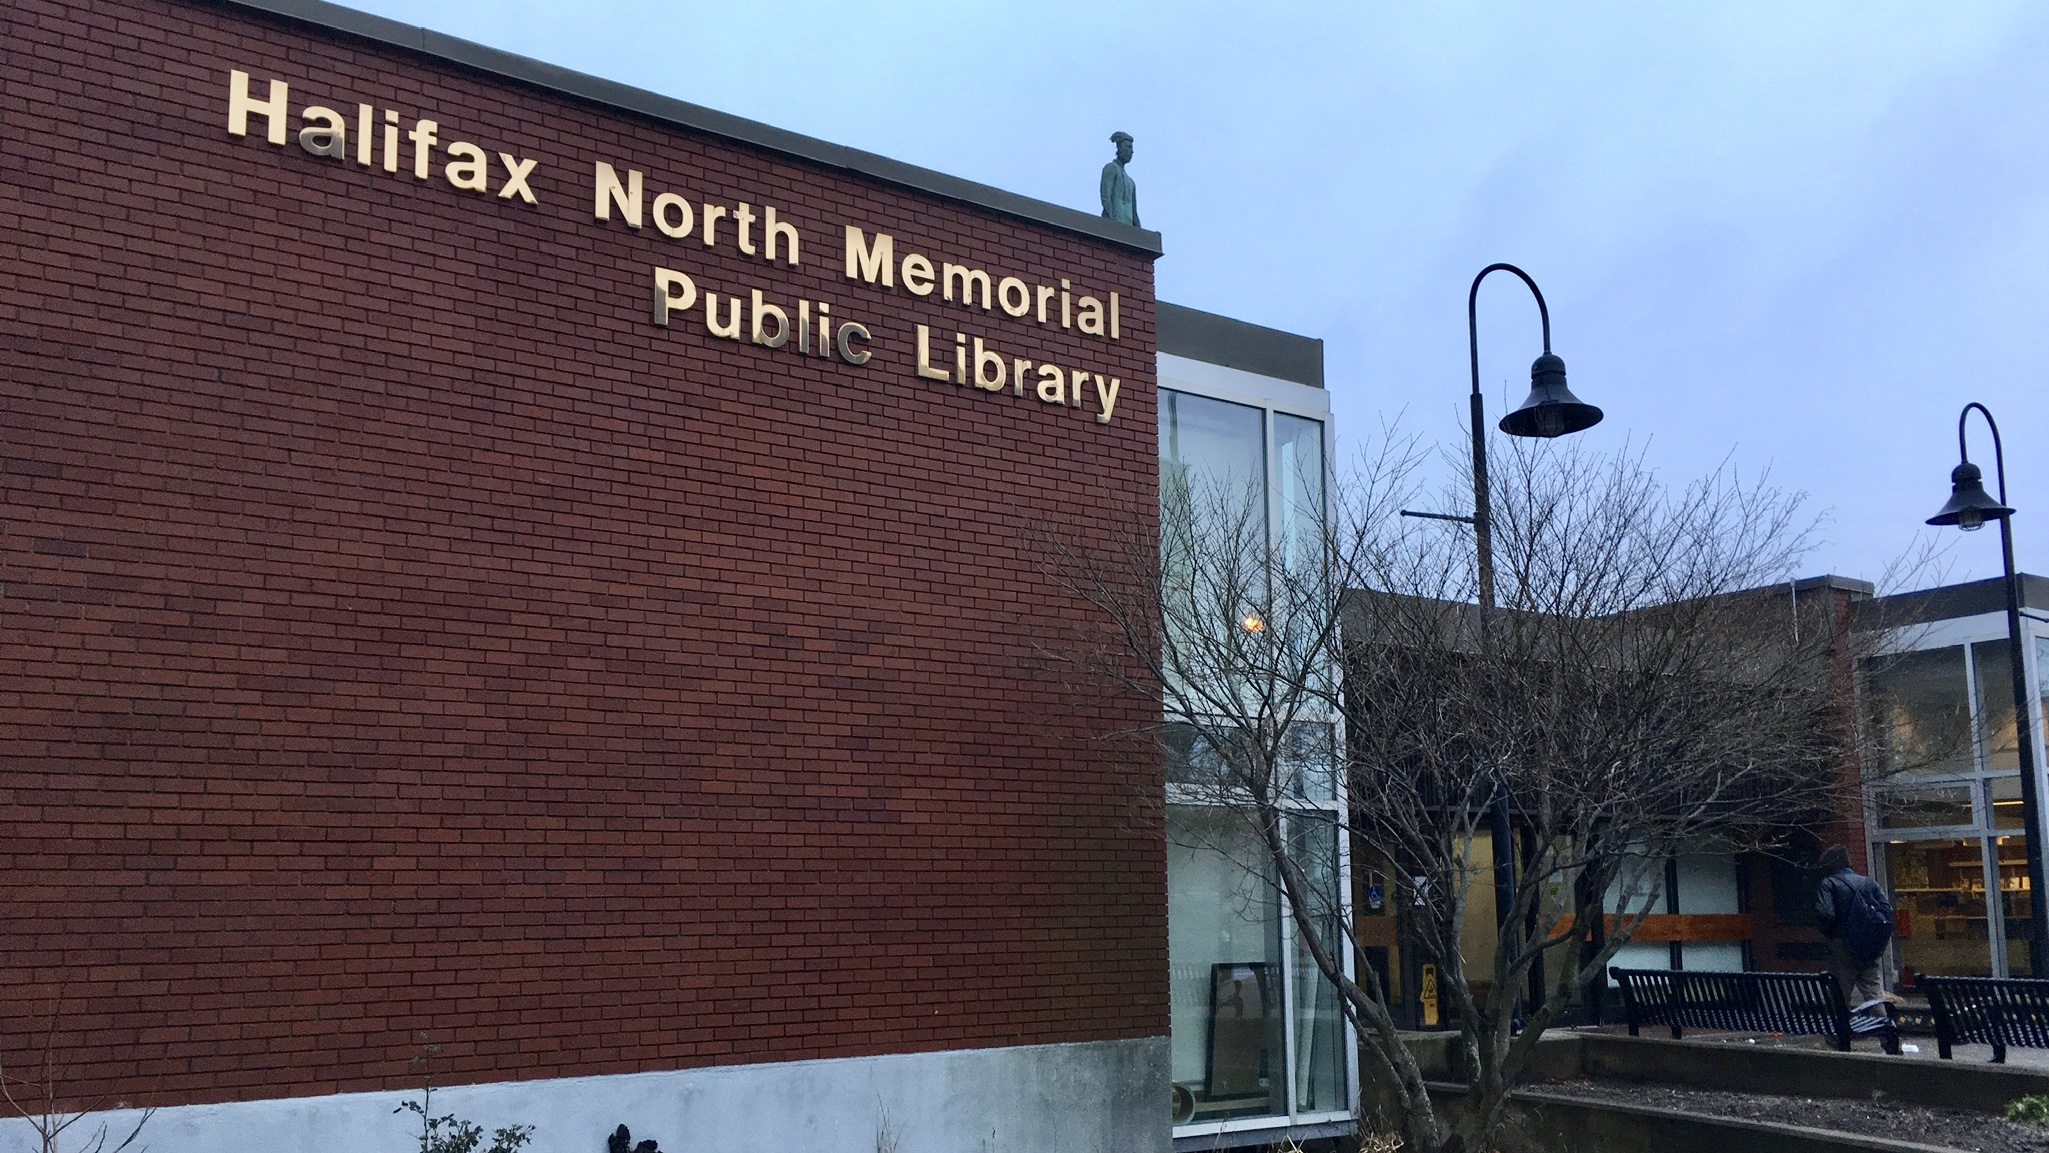 The Halifax North Memorial Public Library, where Friday's event will be held.